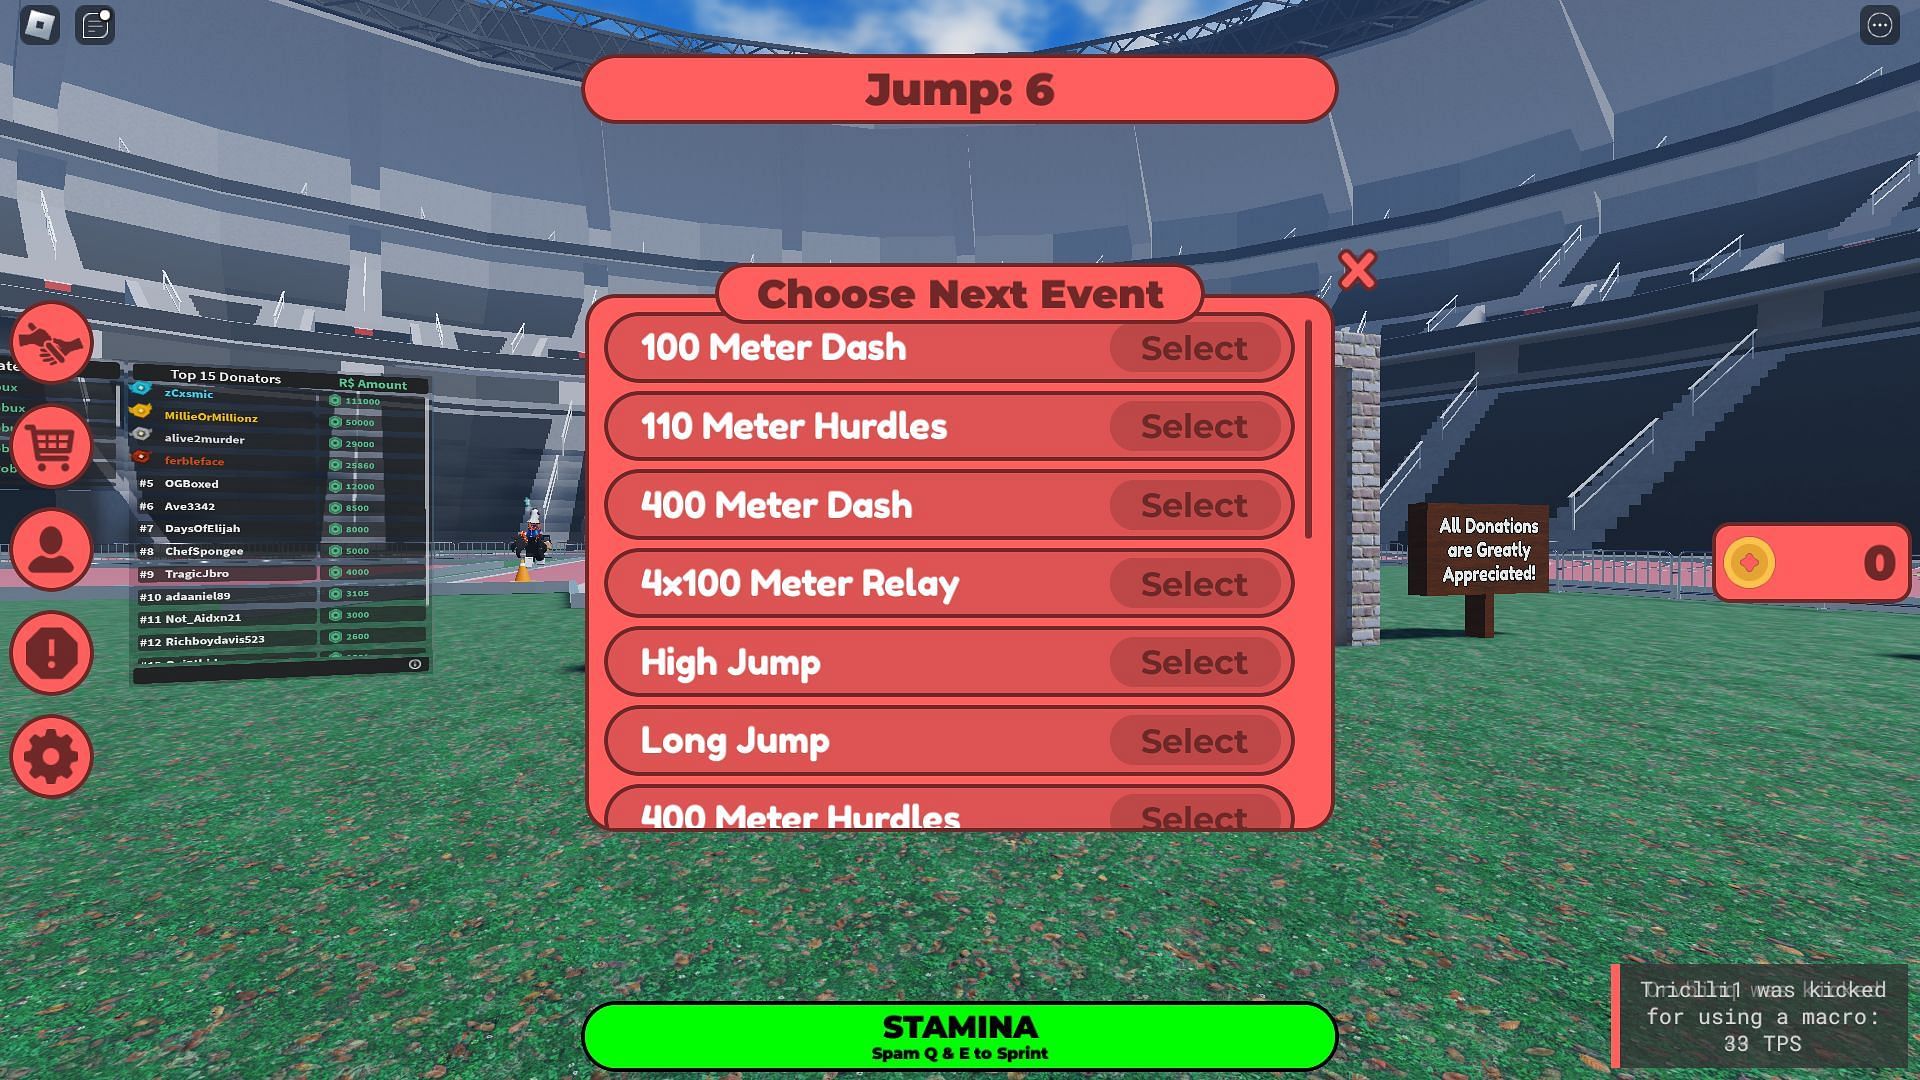 Events featured in the game (Image via Roblox)